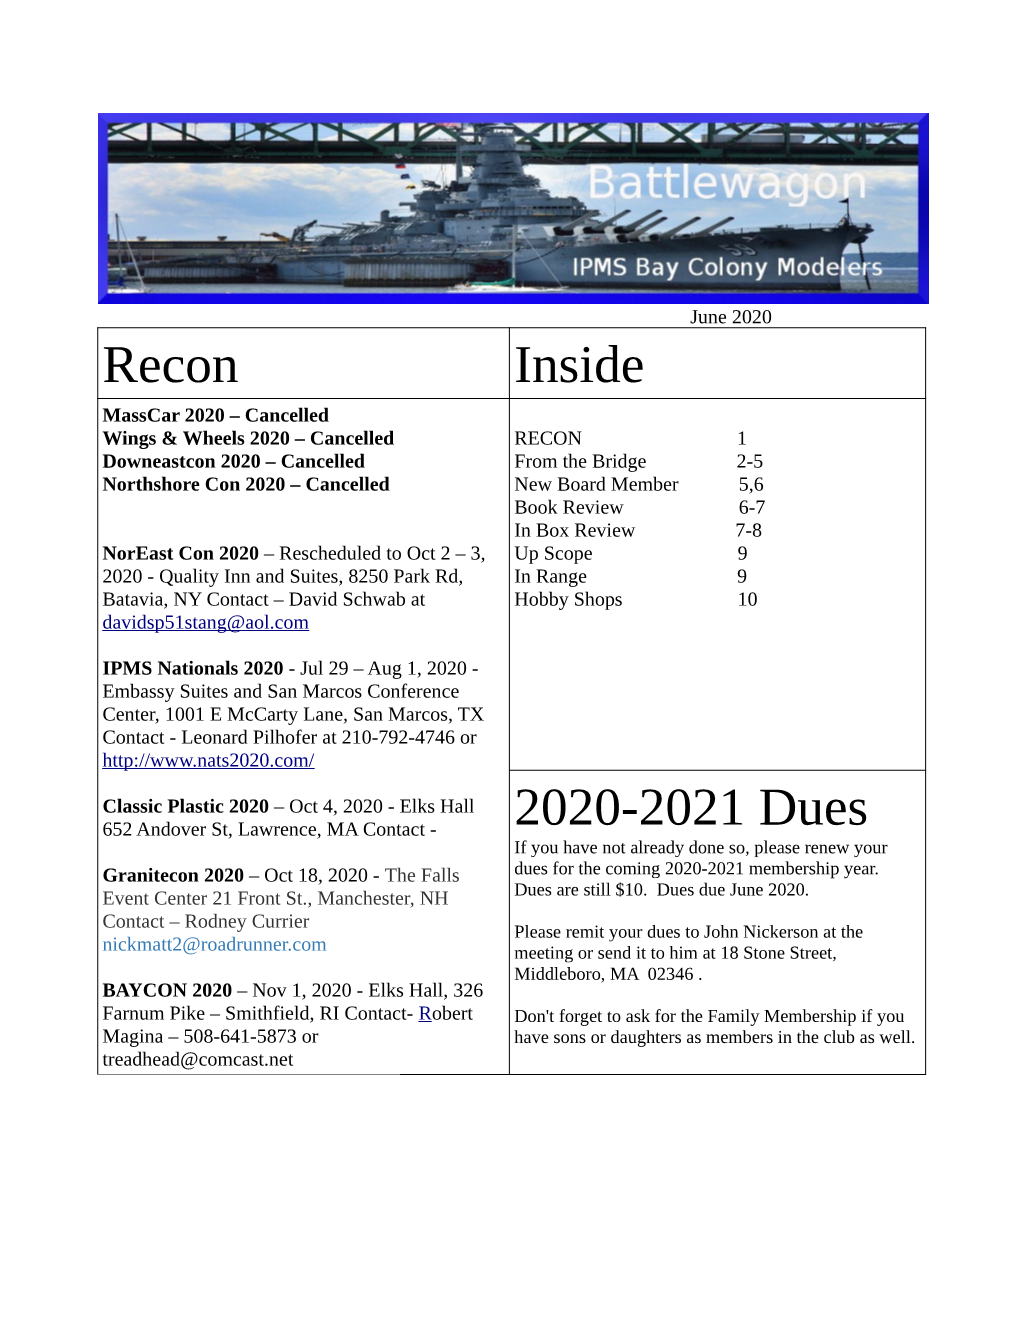 Recon Inside 2020-2021 Dues